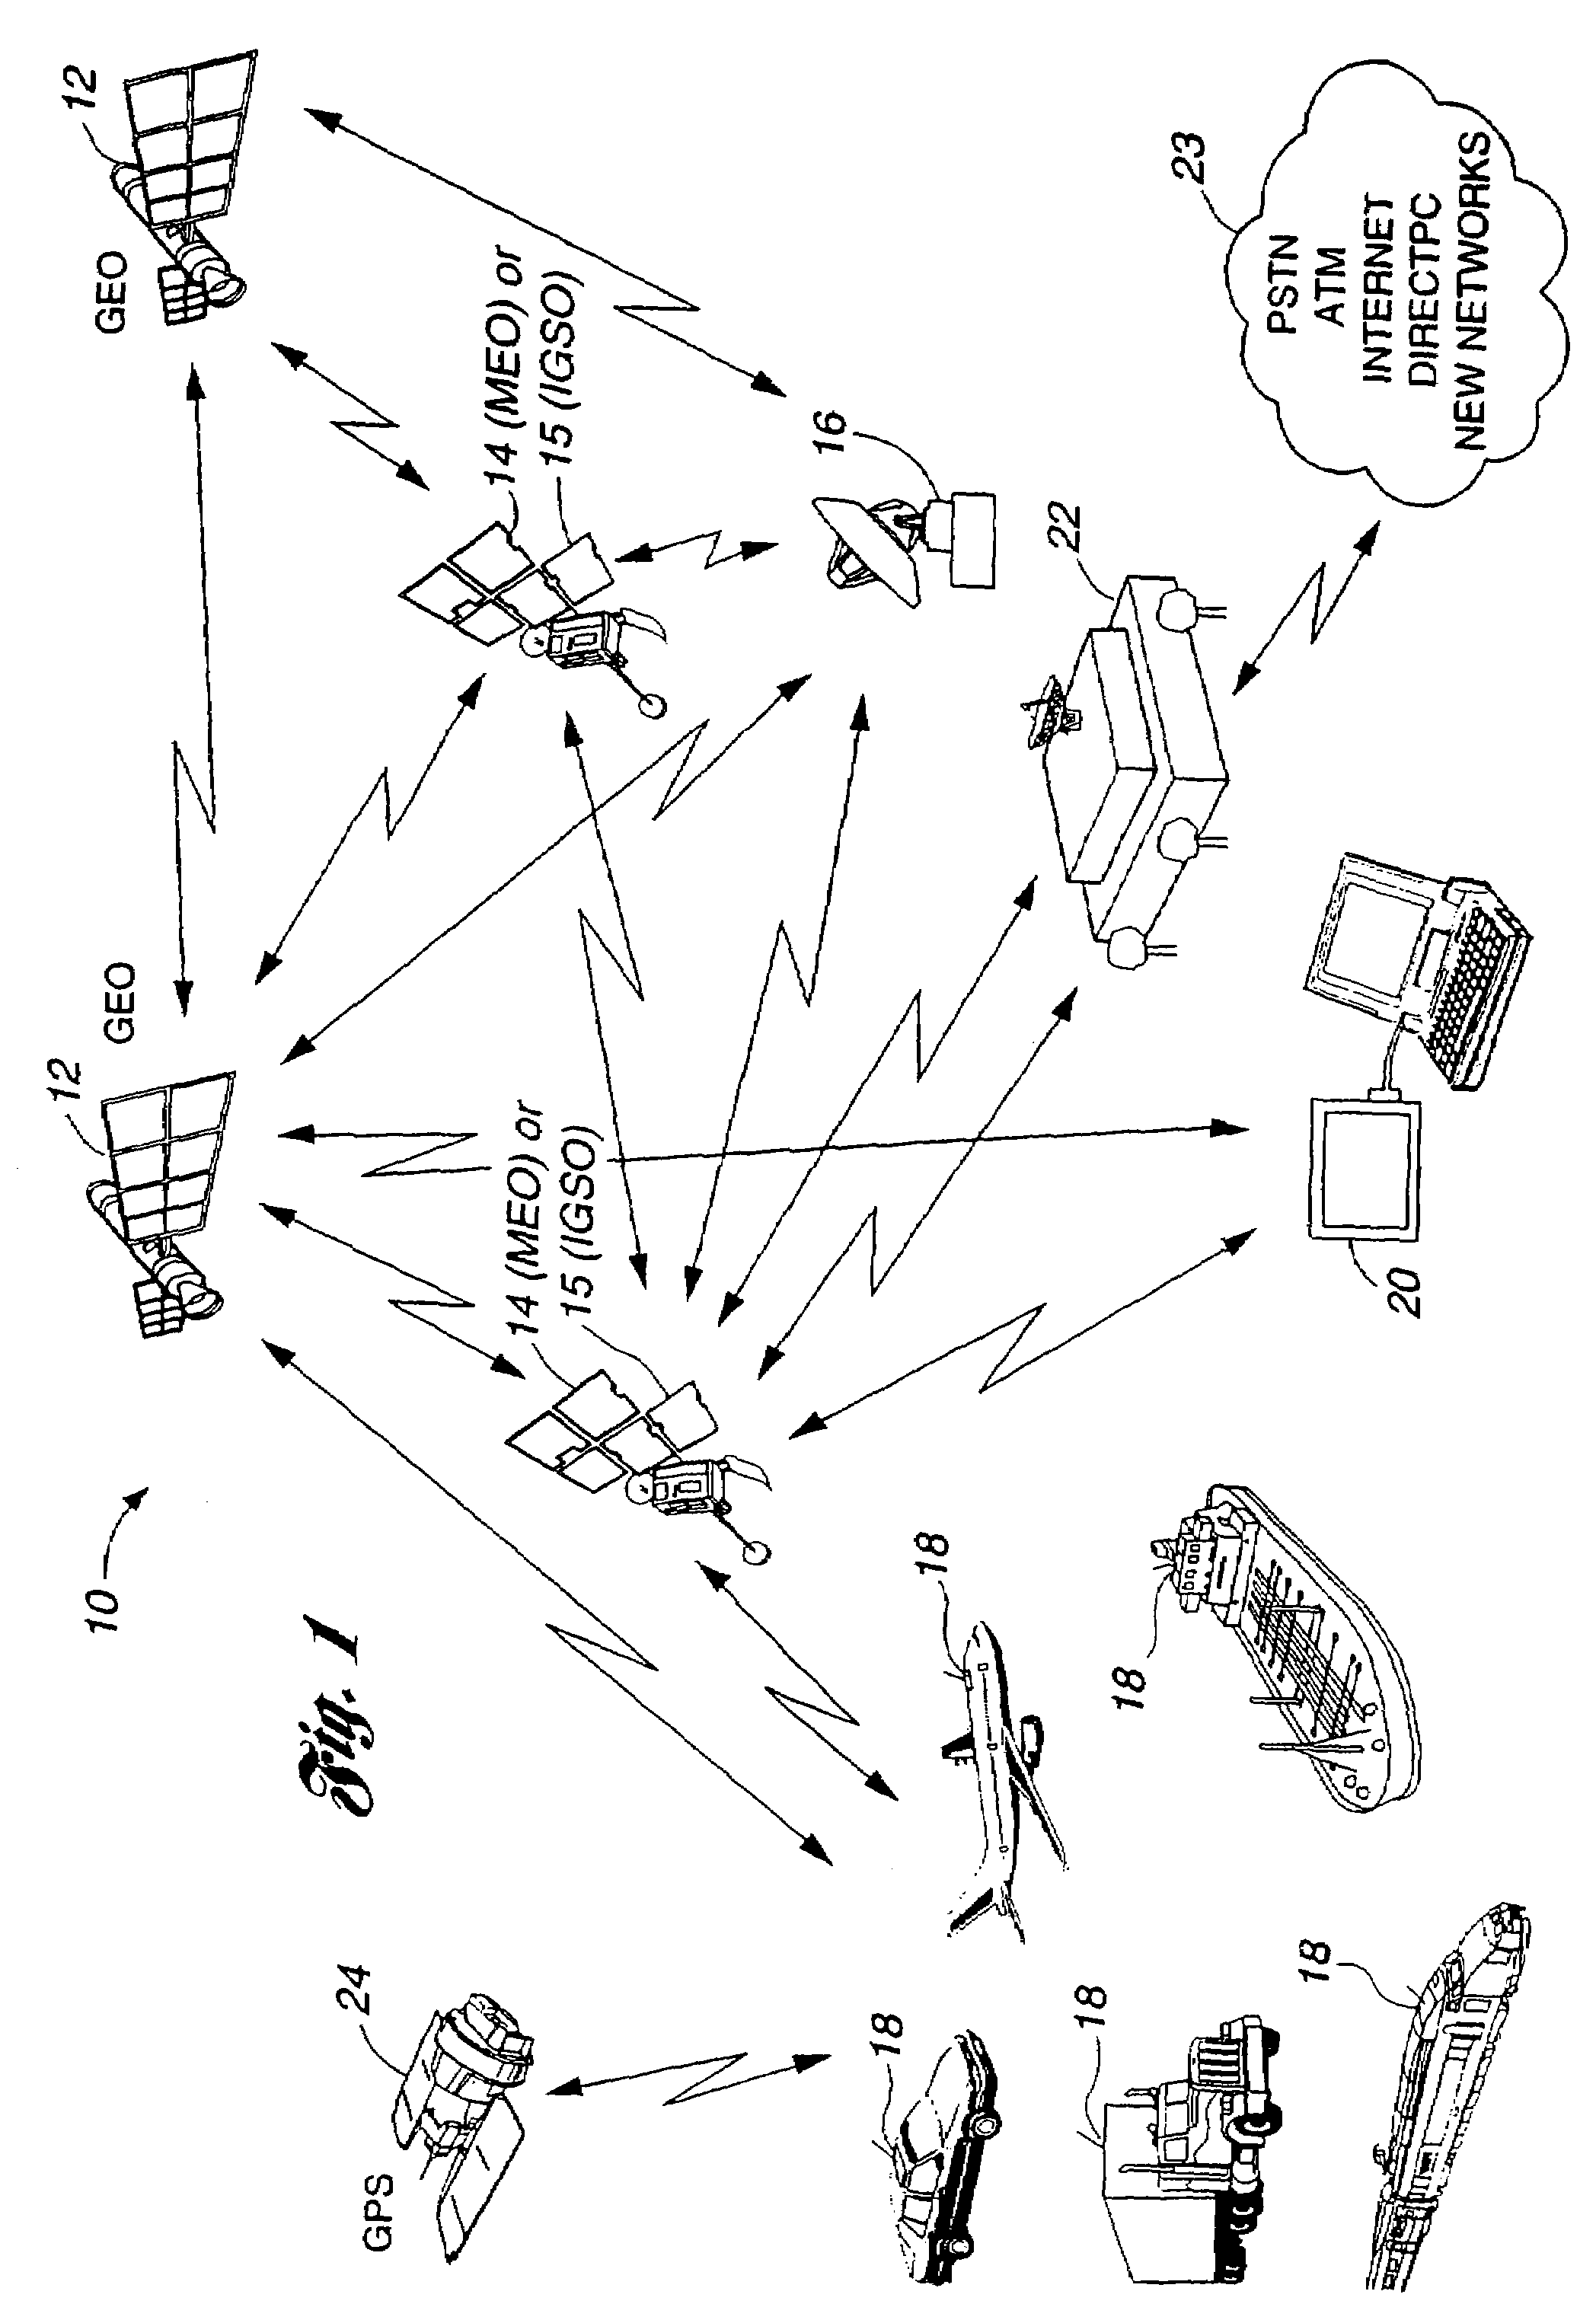 Broadband communication system for mobile users in a satellite-based network